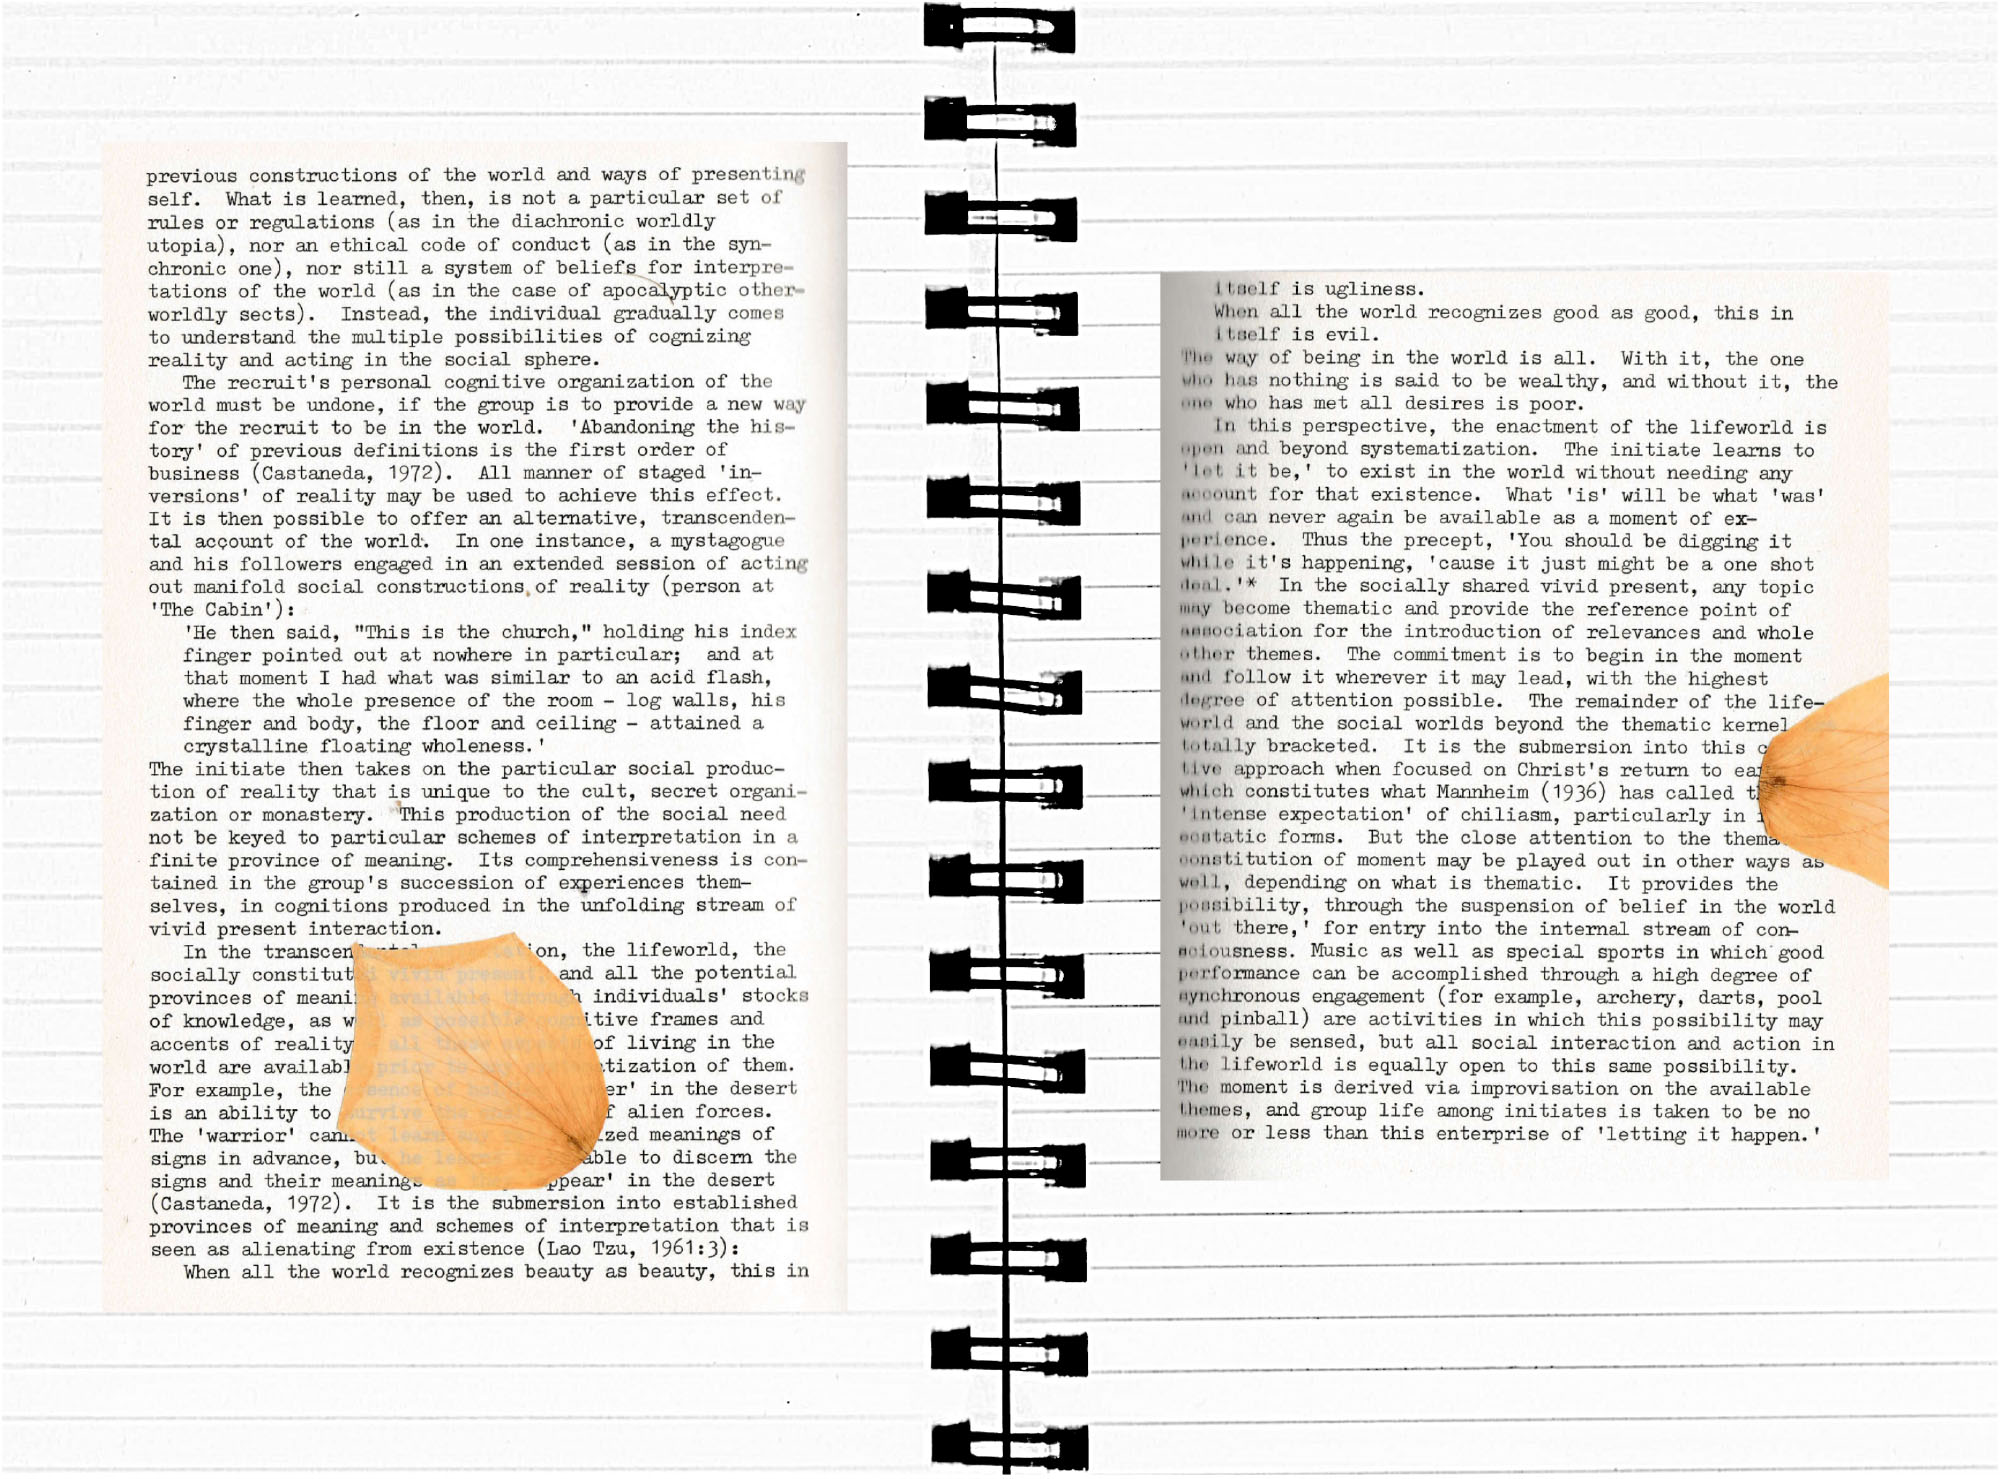 exmouth_scrapbook_notes_on_utopia_final_version-15